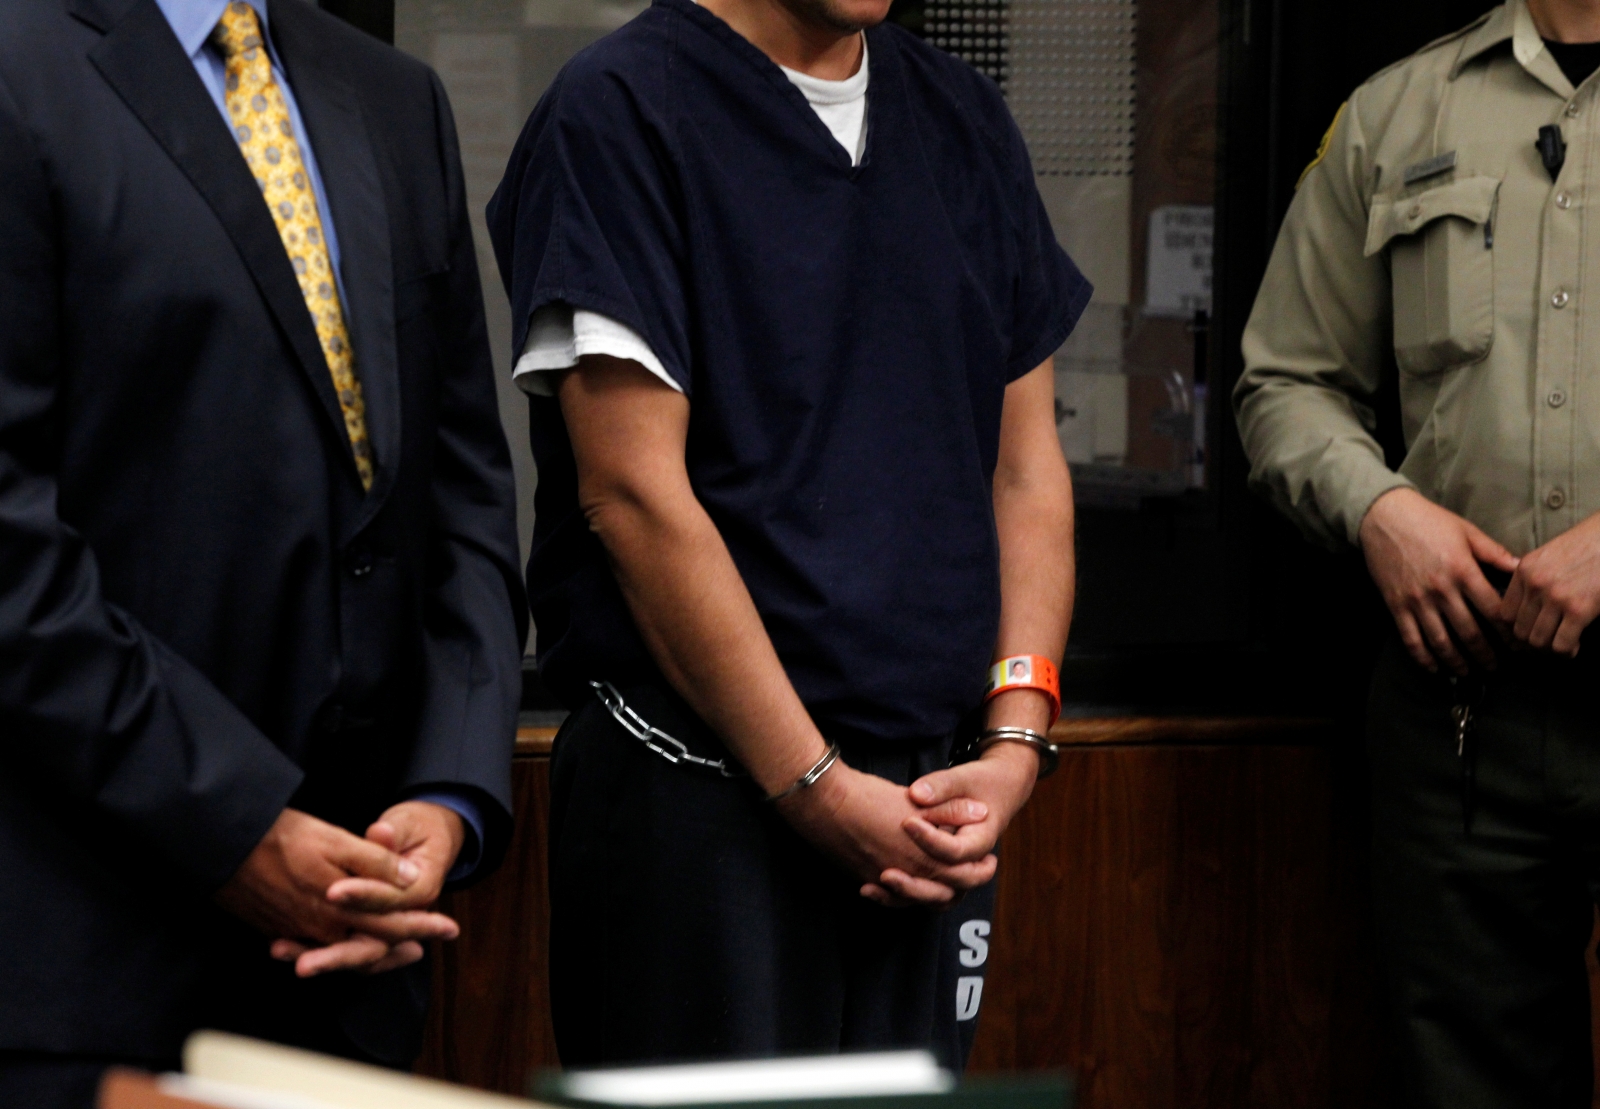 San Diego Homeless Killings David Guerrero Refuses To Enter Plea After Being Charged With 3